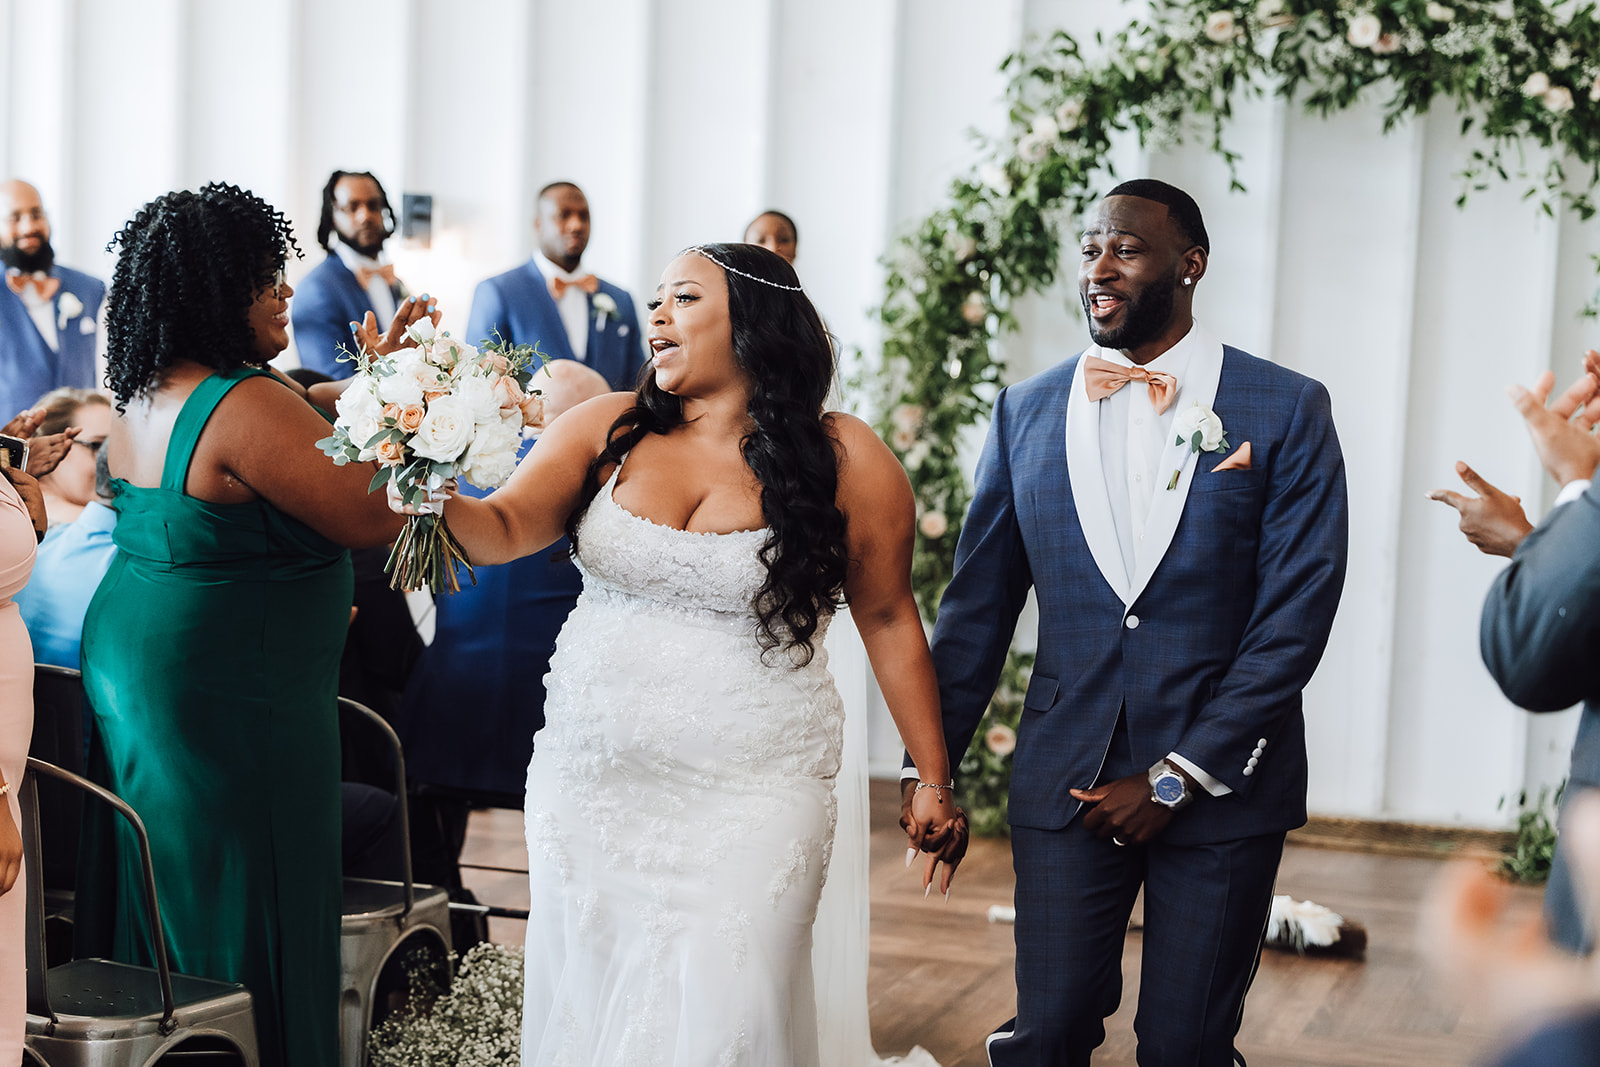 A bride and groom exit their wedding ceremony while their guests clap and cheer